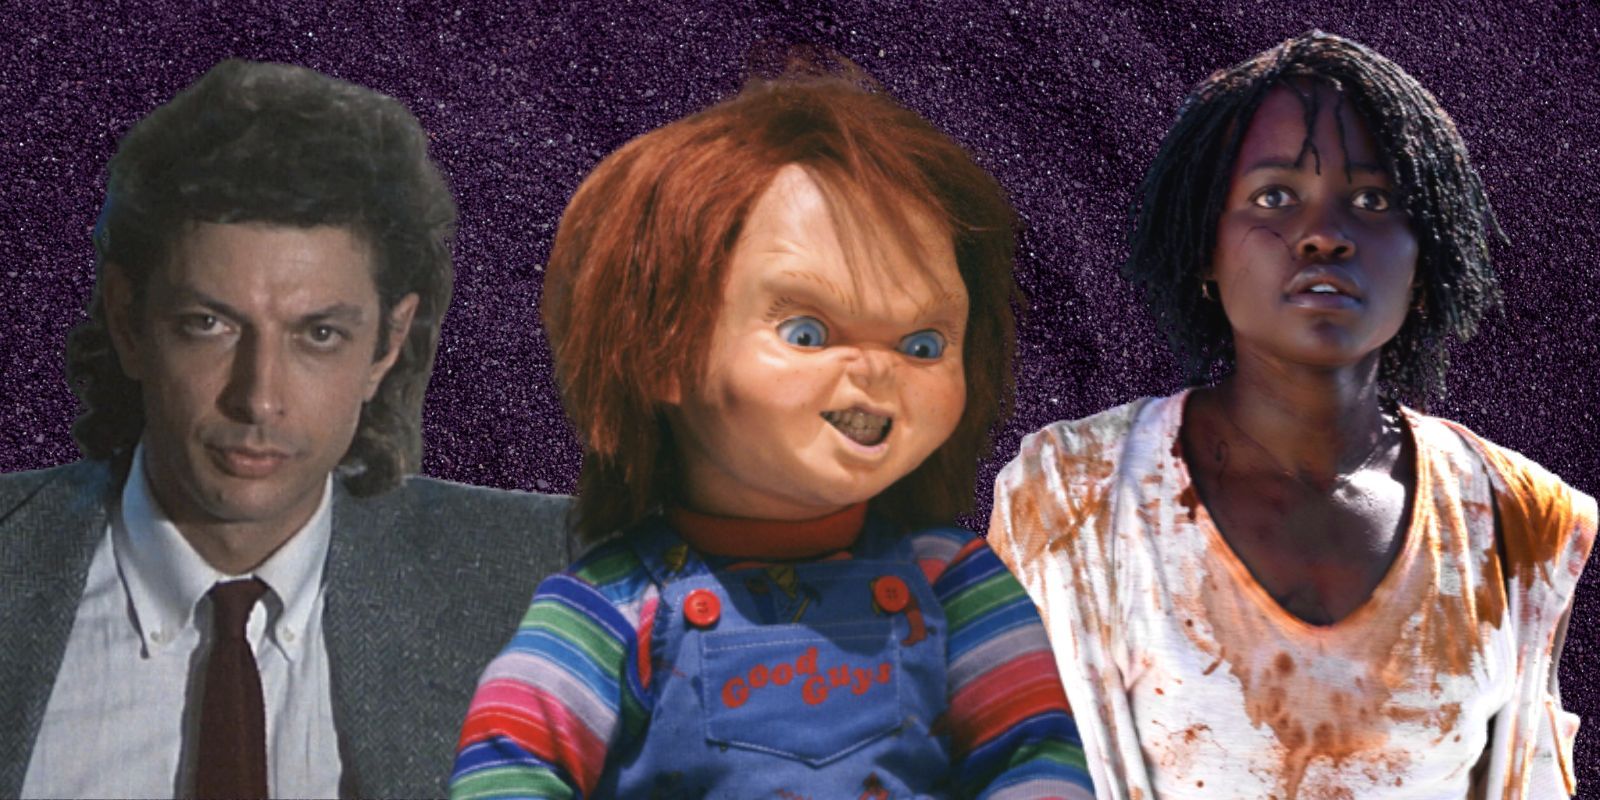 Split of Chucky, Seth Brundle, Adelaide in horror movies where the villain is the main character